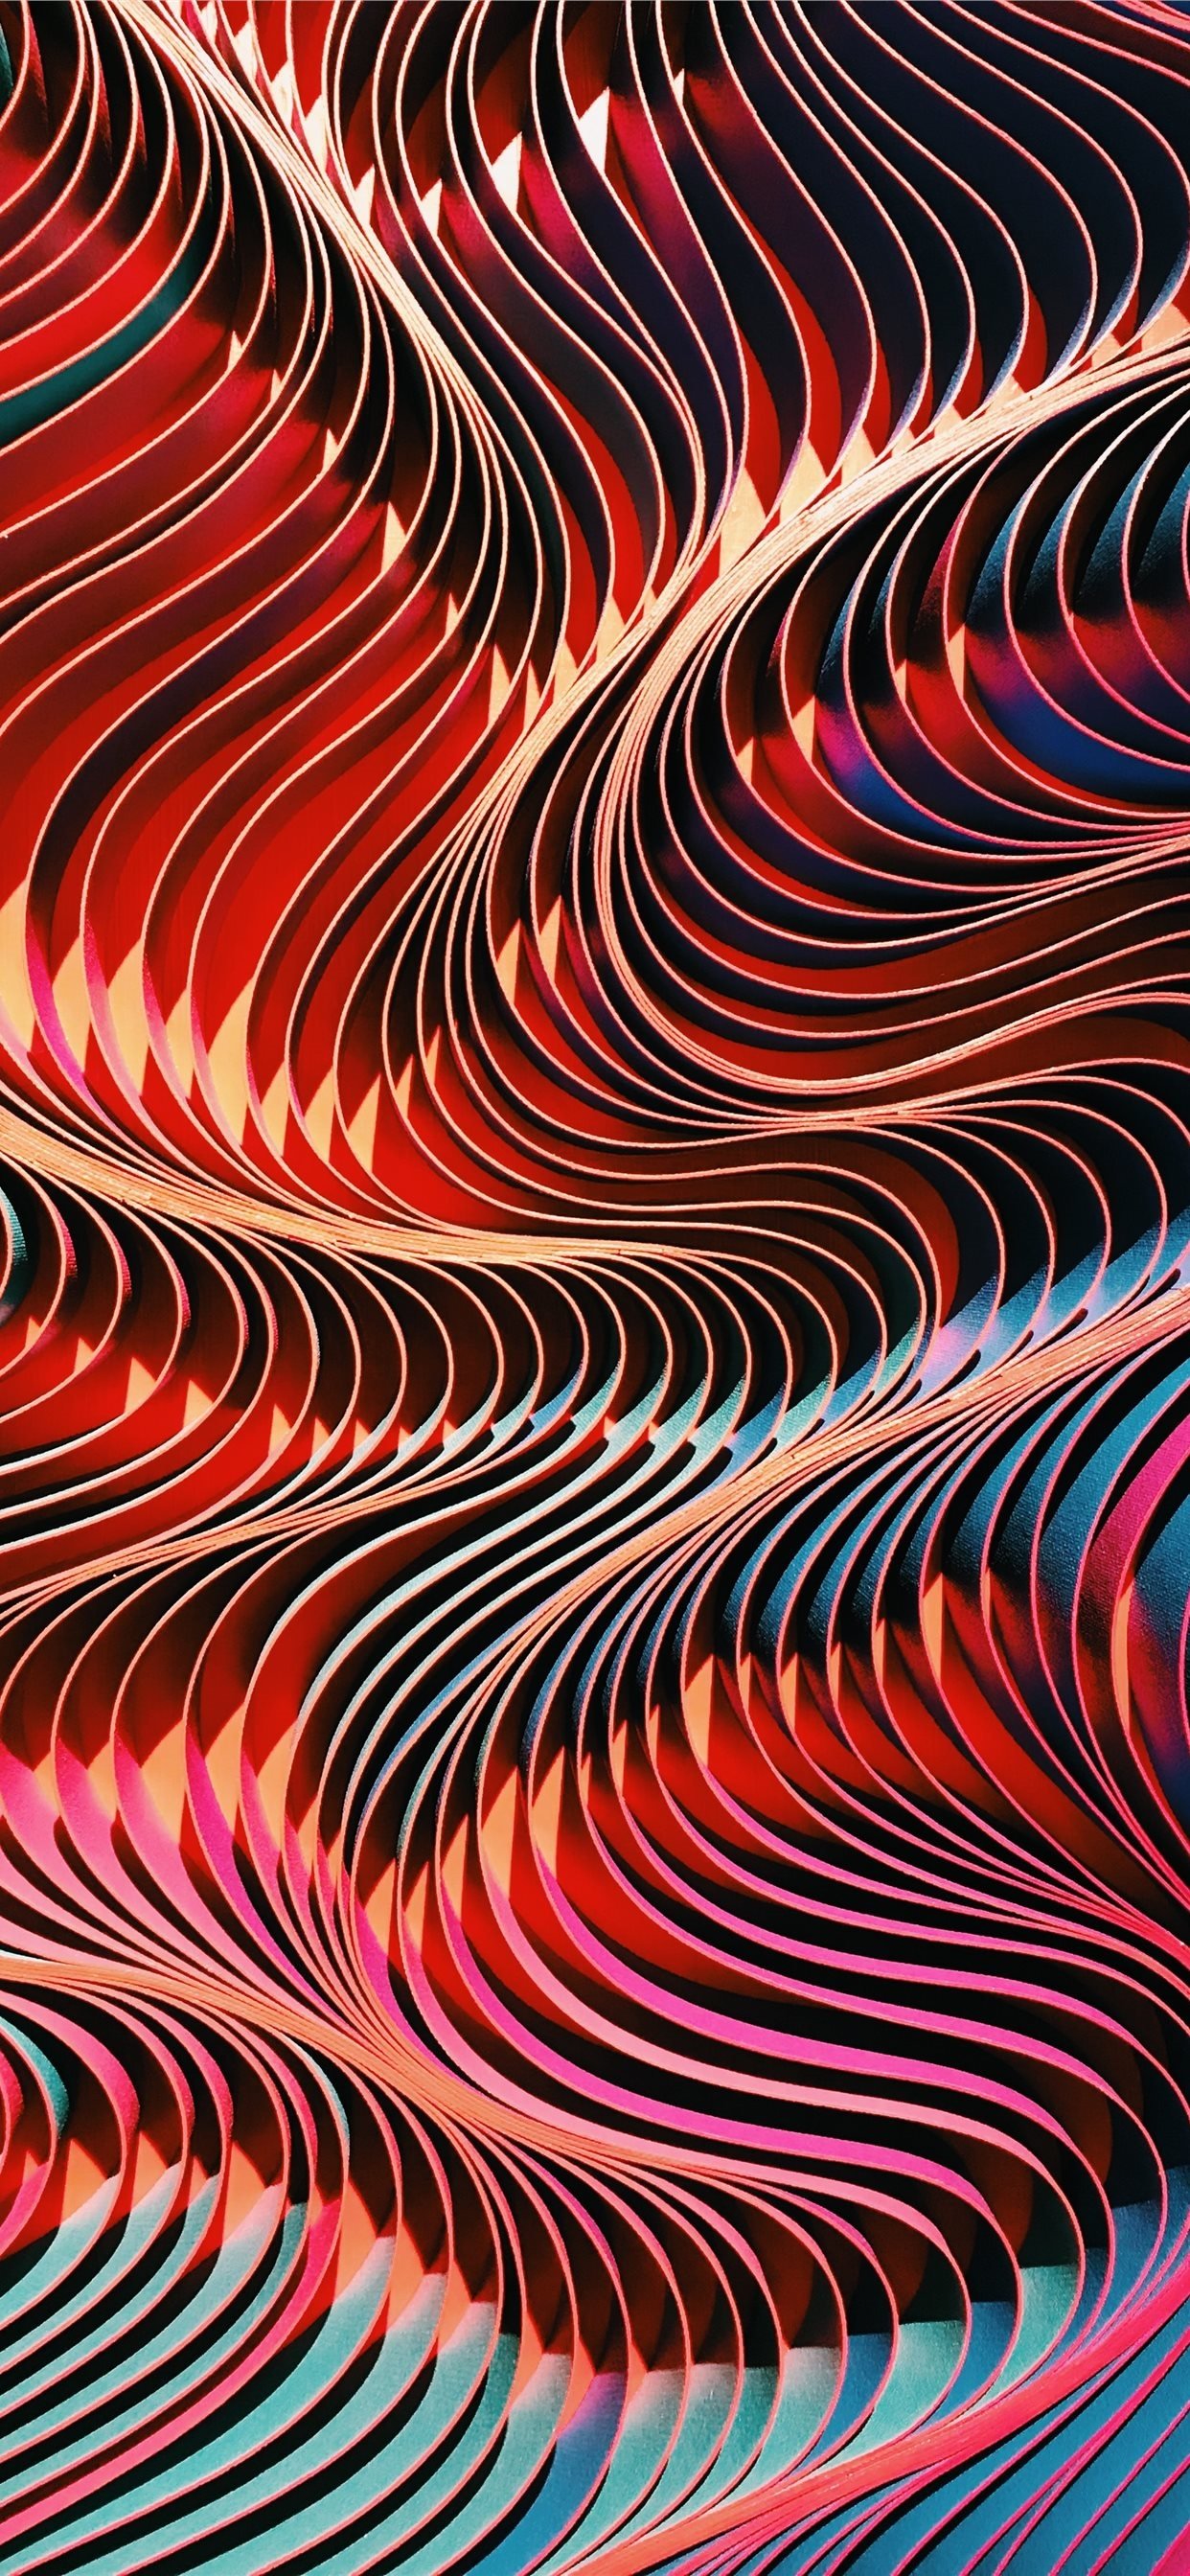 Abstract Curved Waves Wallpaper For Iphone 7 , HD Wallpaper & Backgrounds